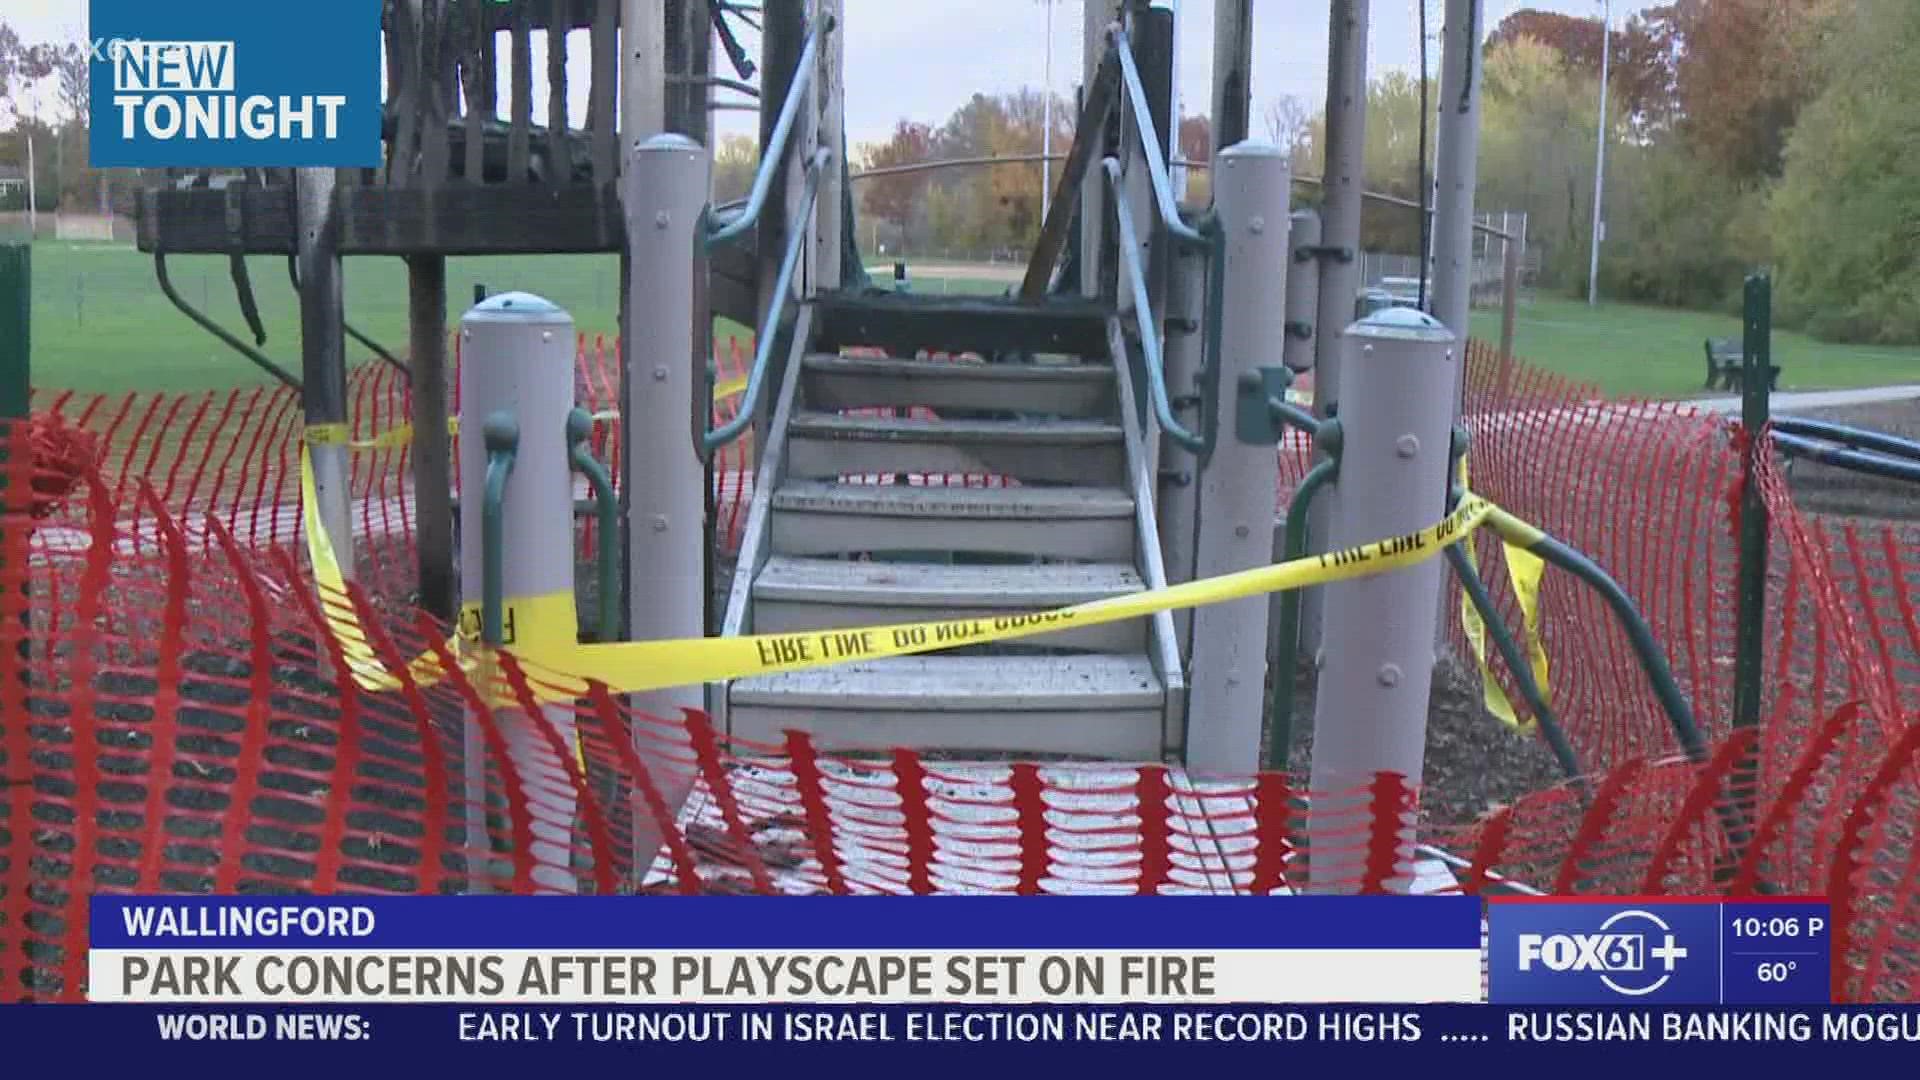 A play set at Doolittle Park in Wallingford was set on fire Saturday night and is now closed off as the town works to replace the equipment.